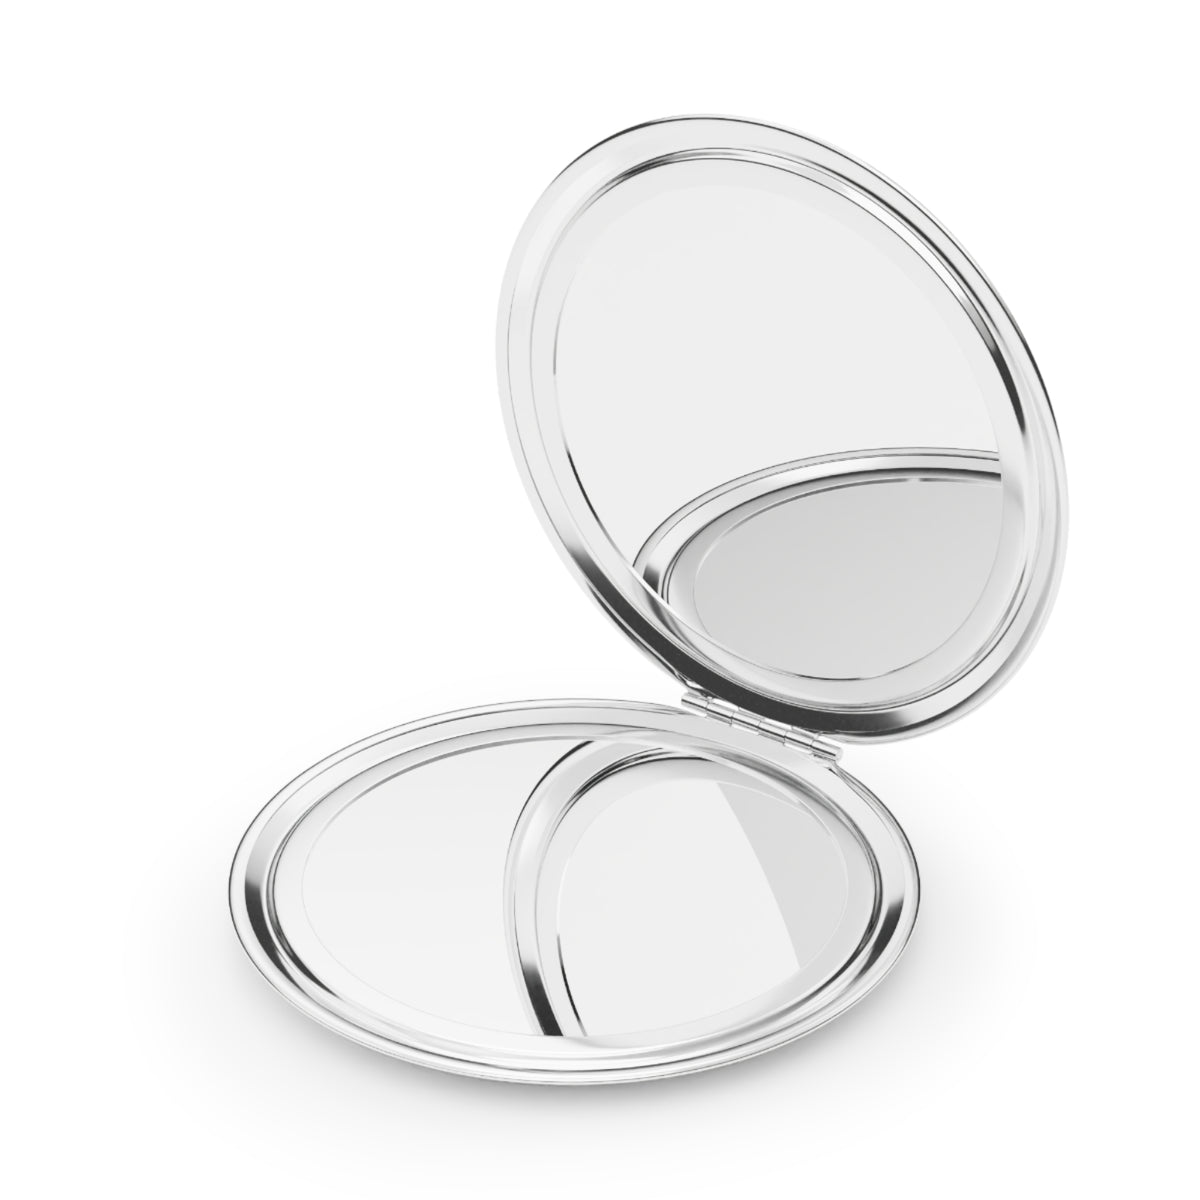 open view of a compact mirror